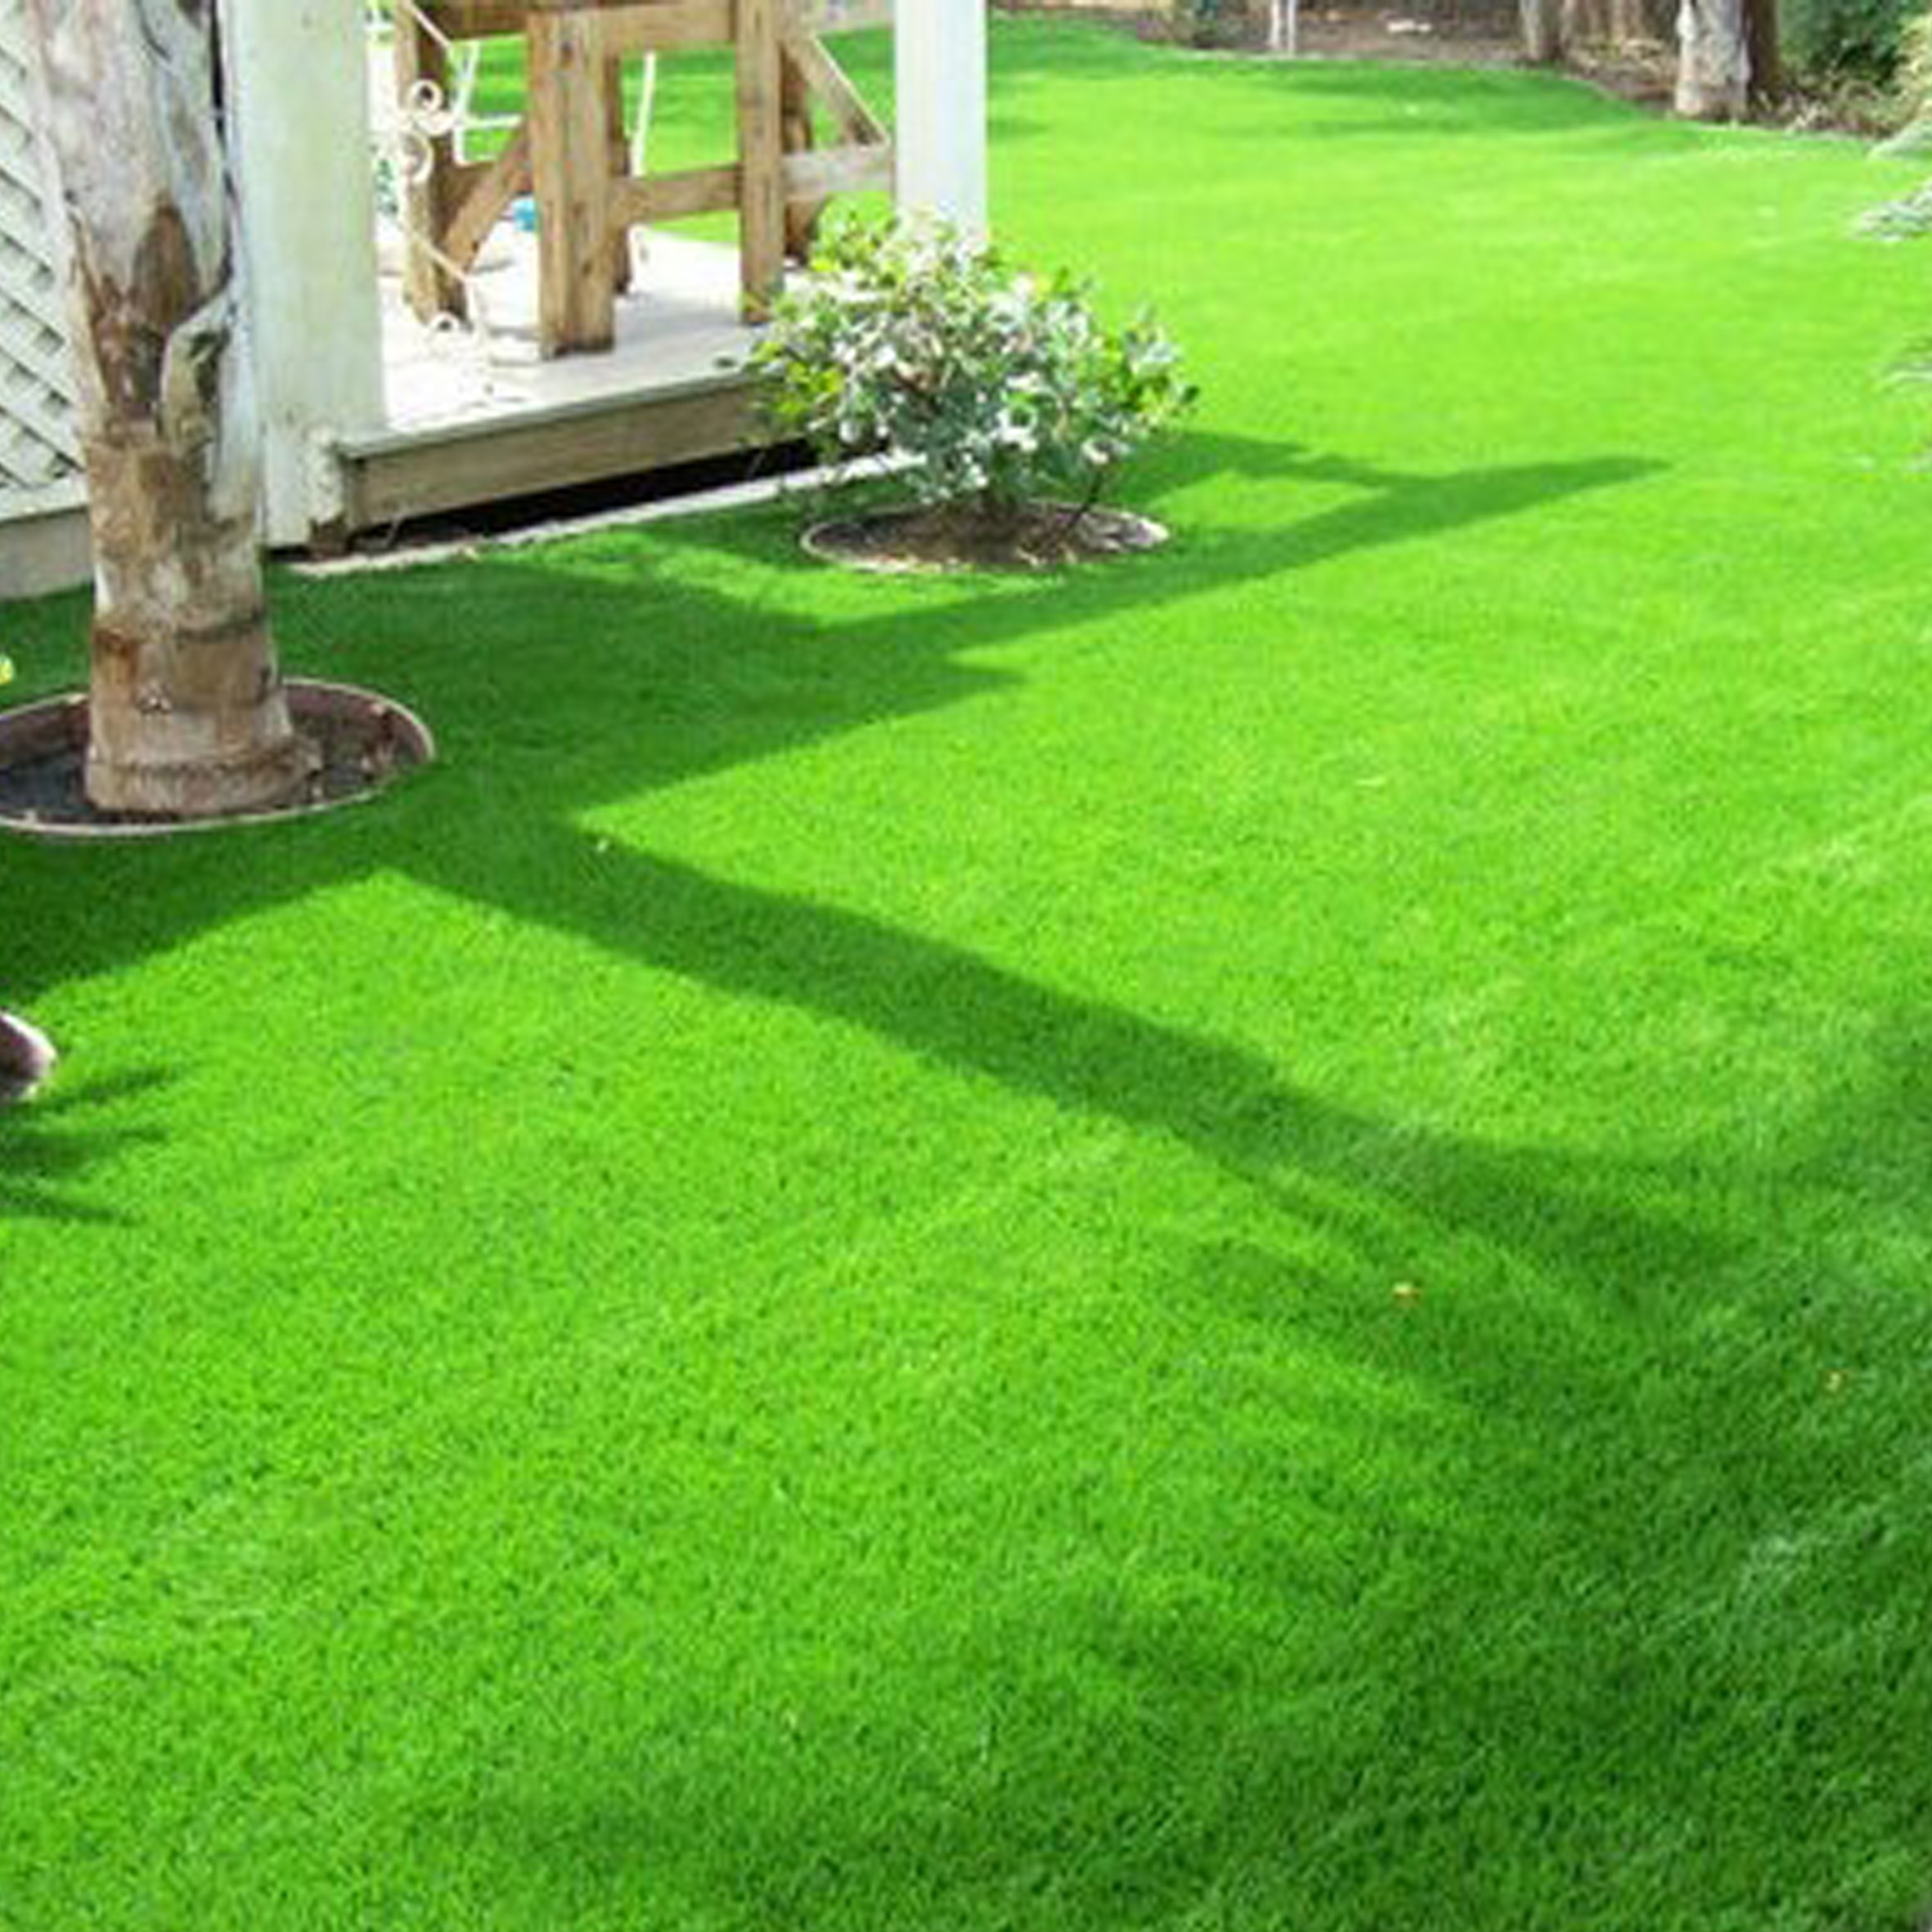 9 Advantages of Using Artificial Grass for Your Lawn